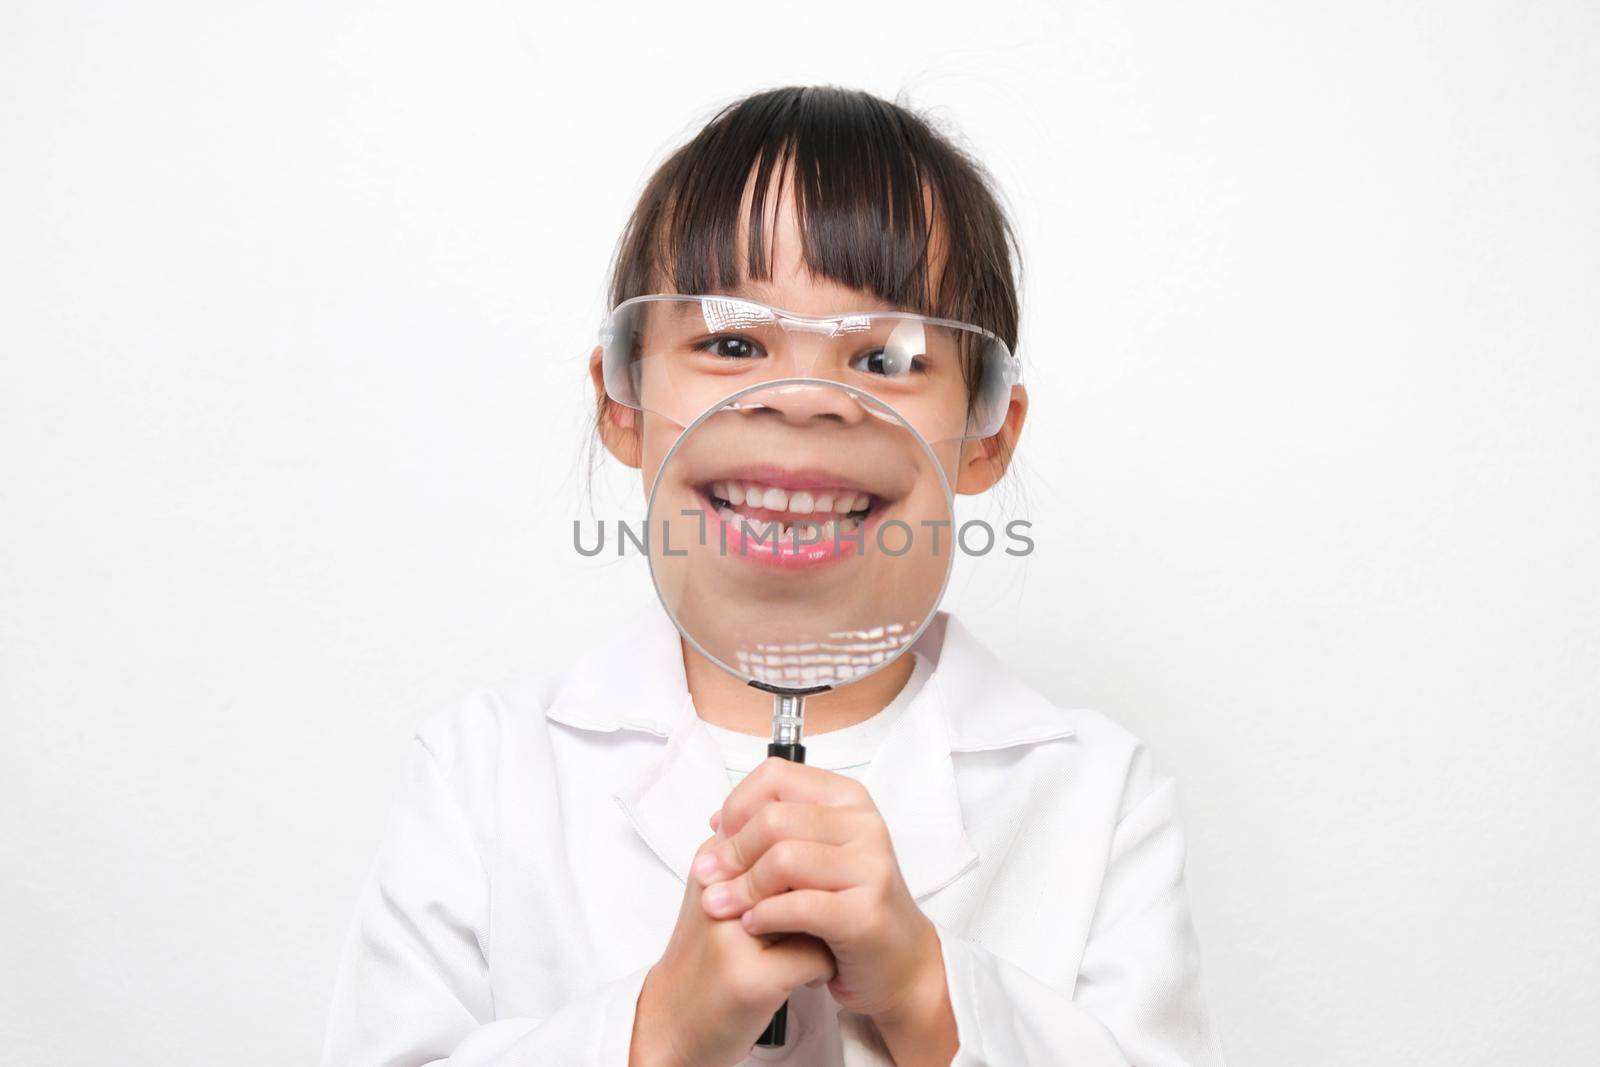 Portrait of a smiling little scientist holding a magnifying glass on a white background. A little girl role playing in a doctor or science costume.